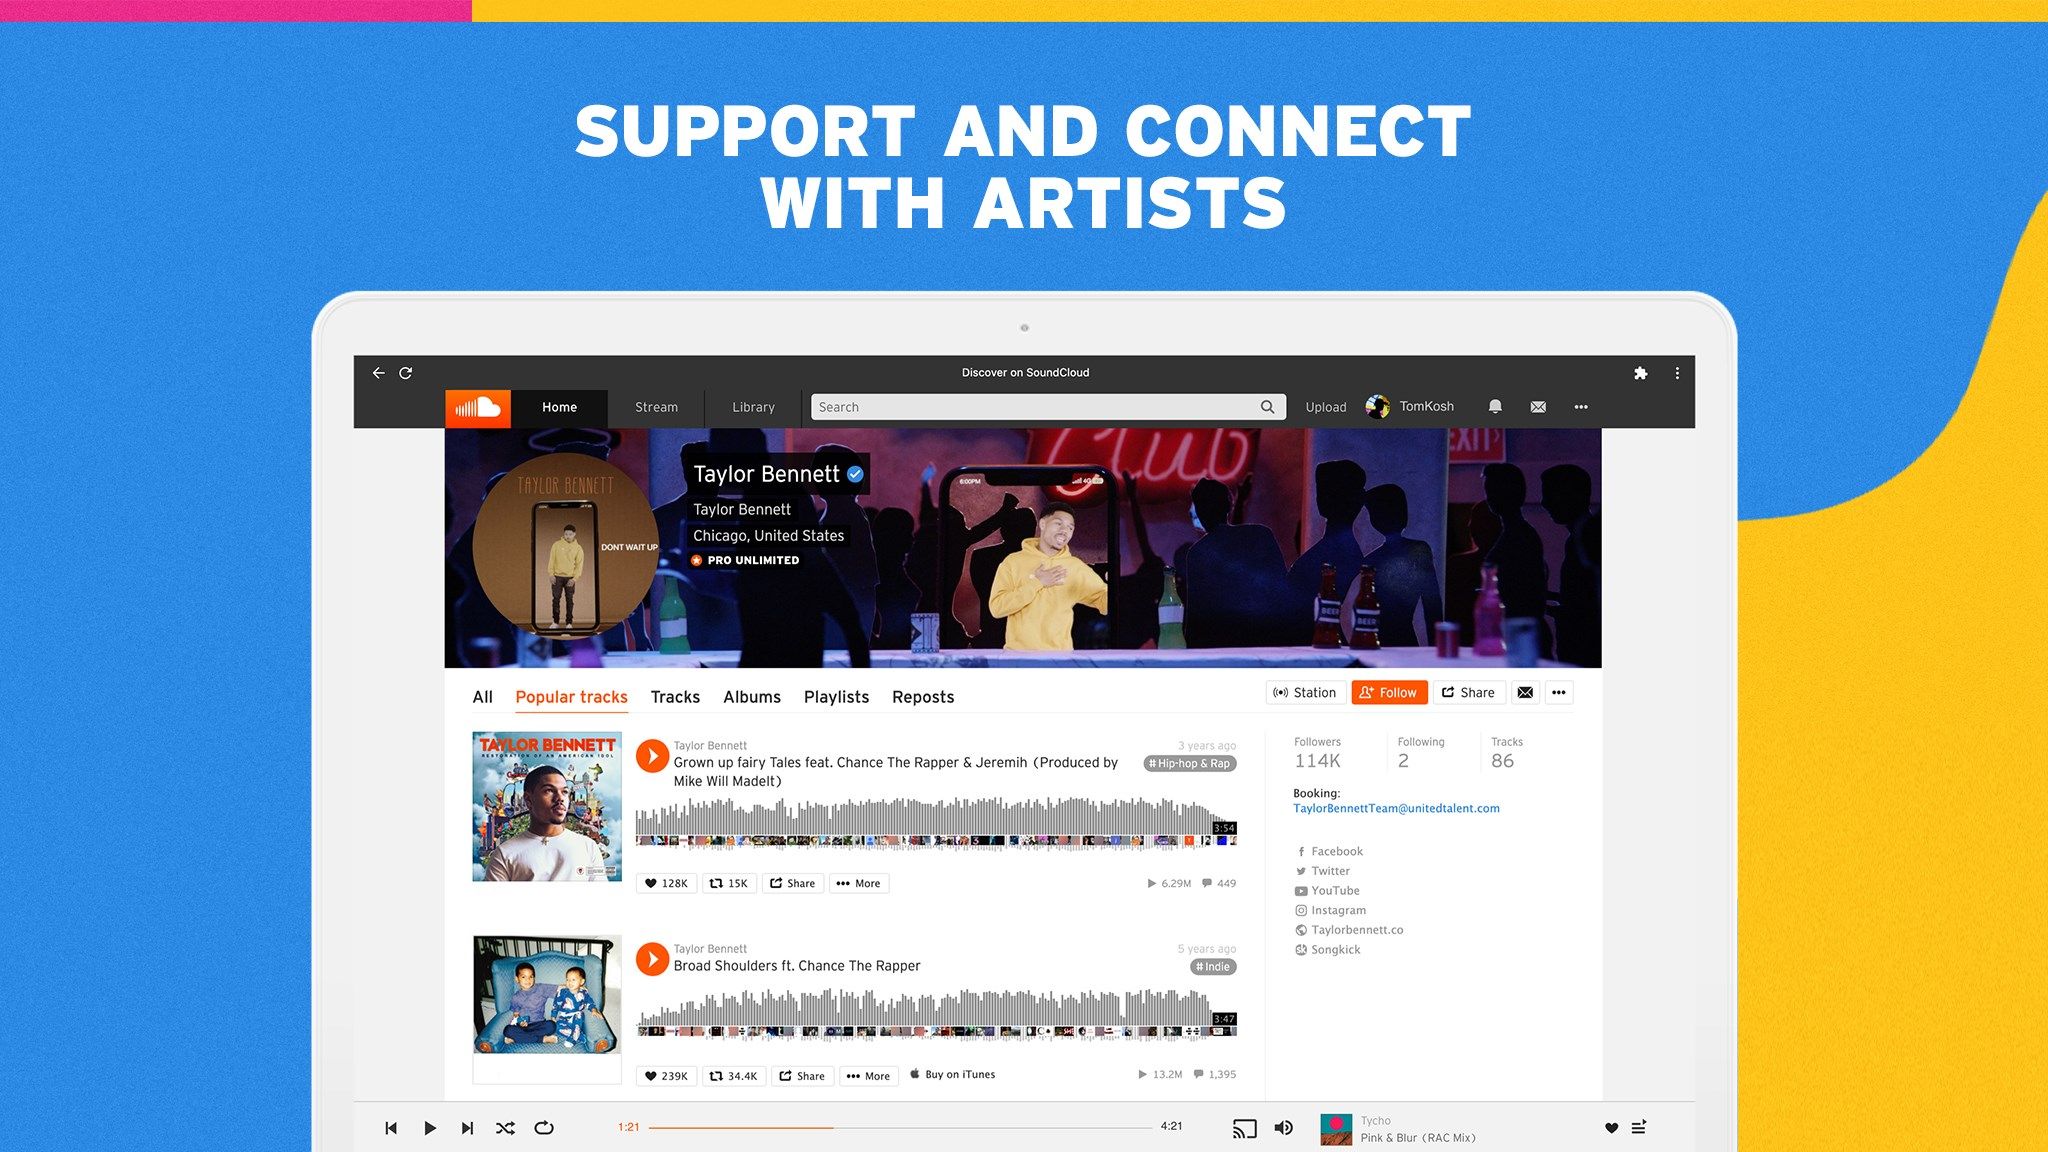 Support and connect with artists